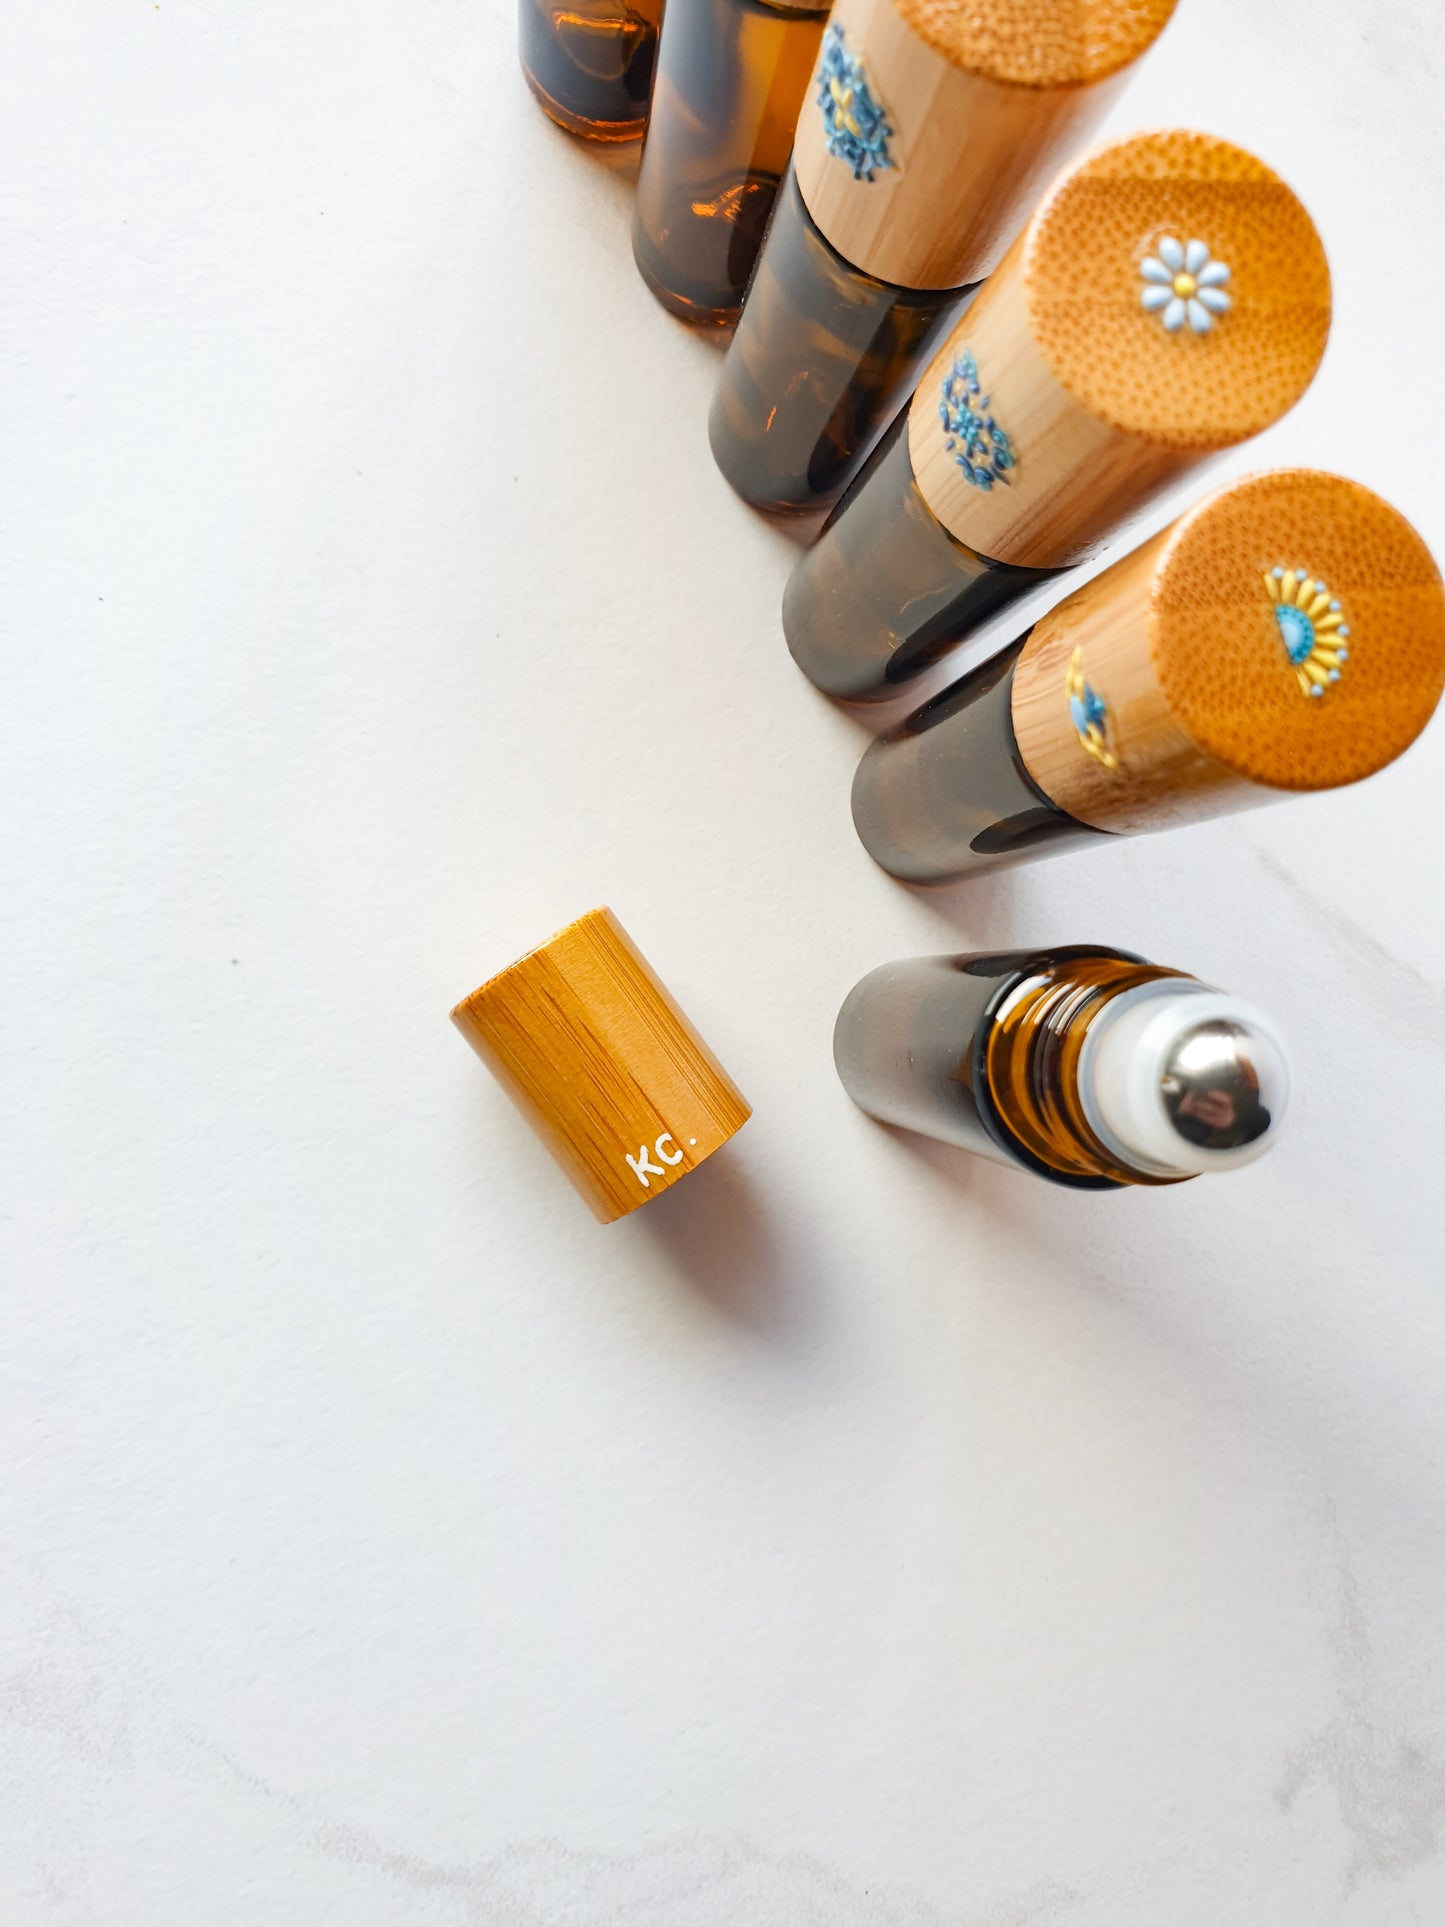 "Lucia" Set of 6 Bamboo Rollers